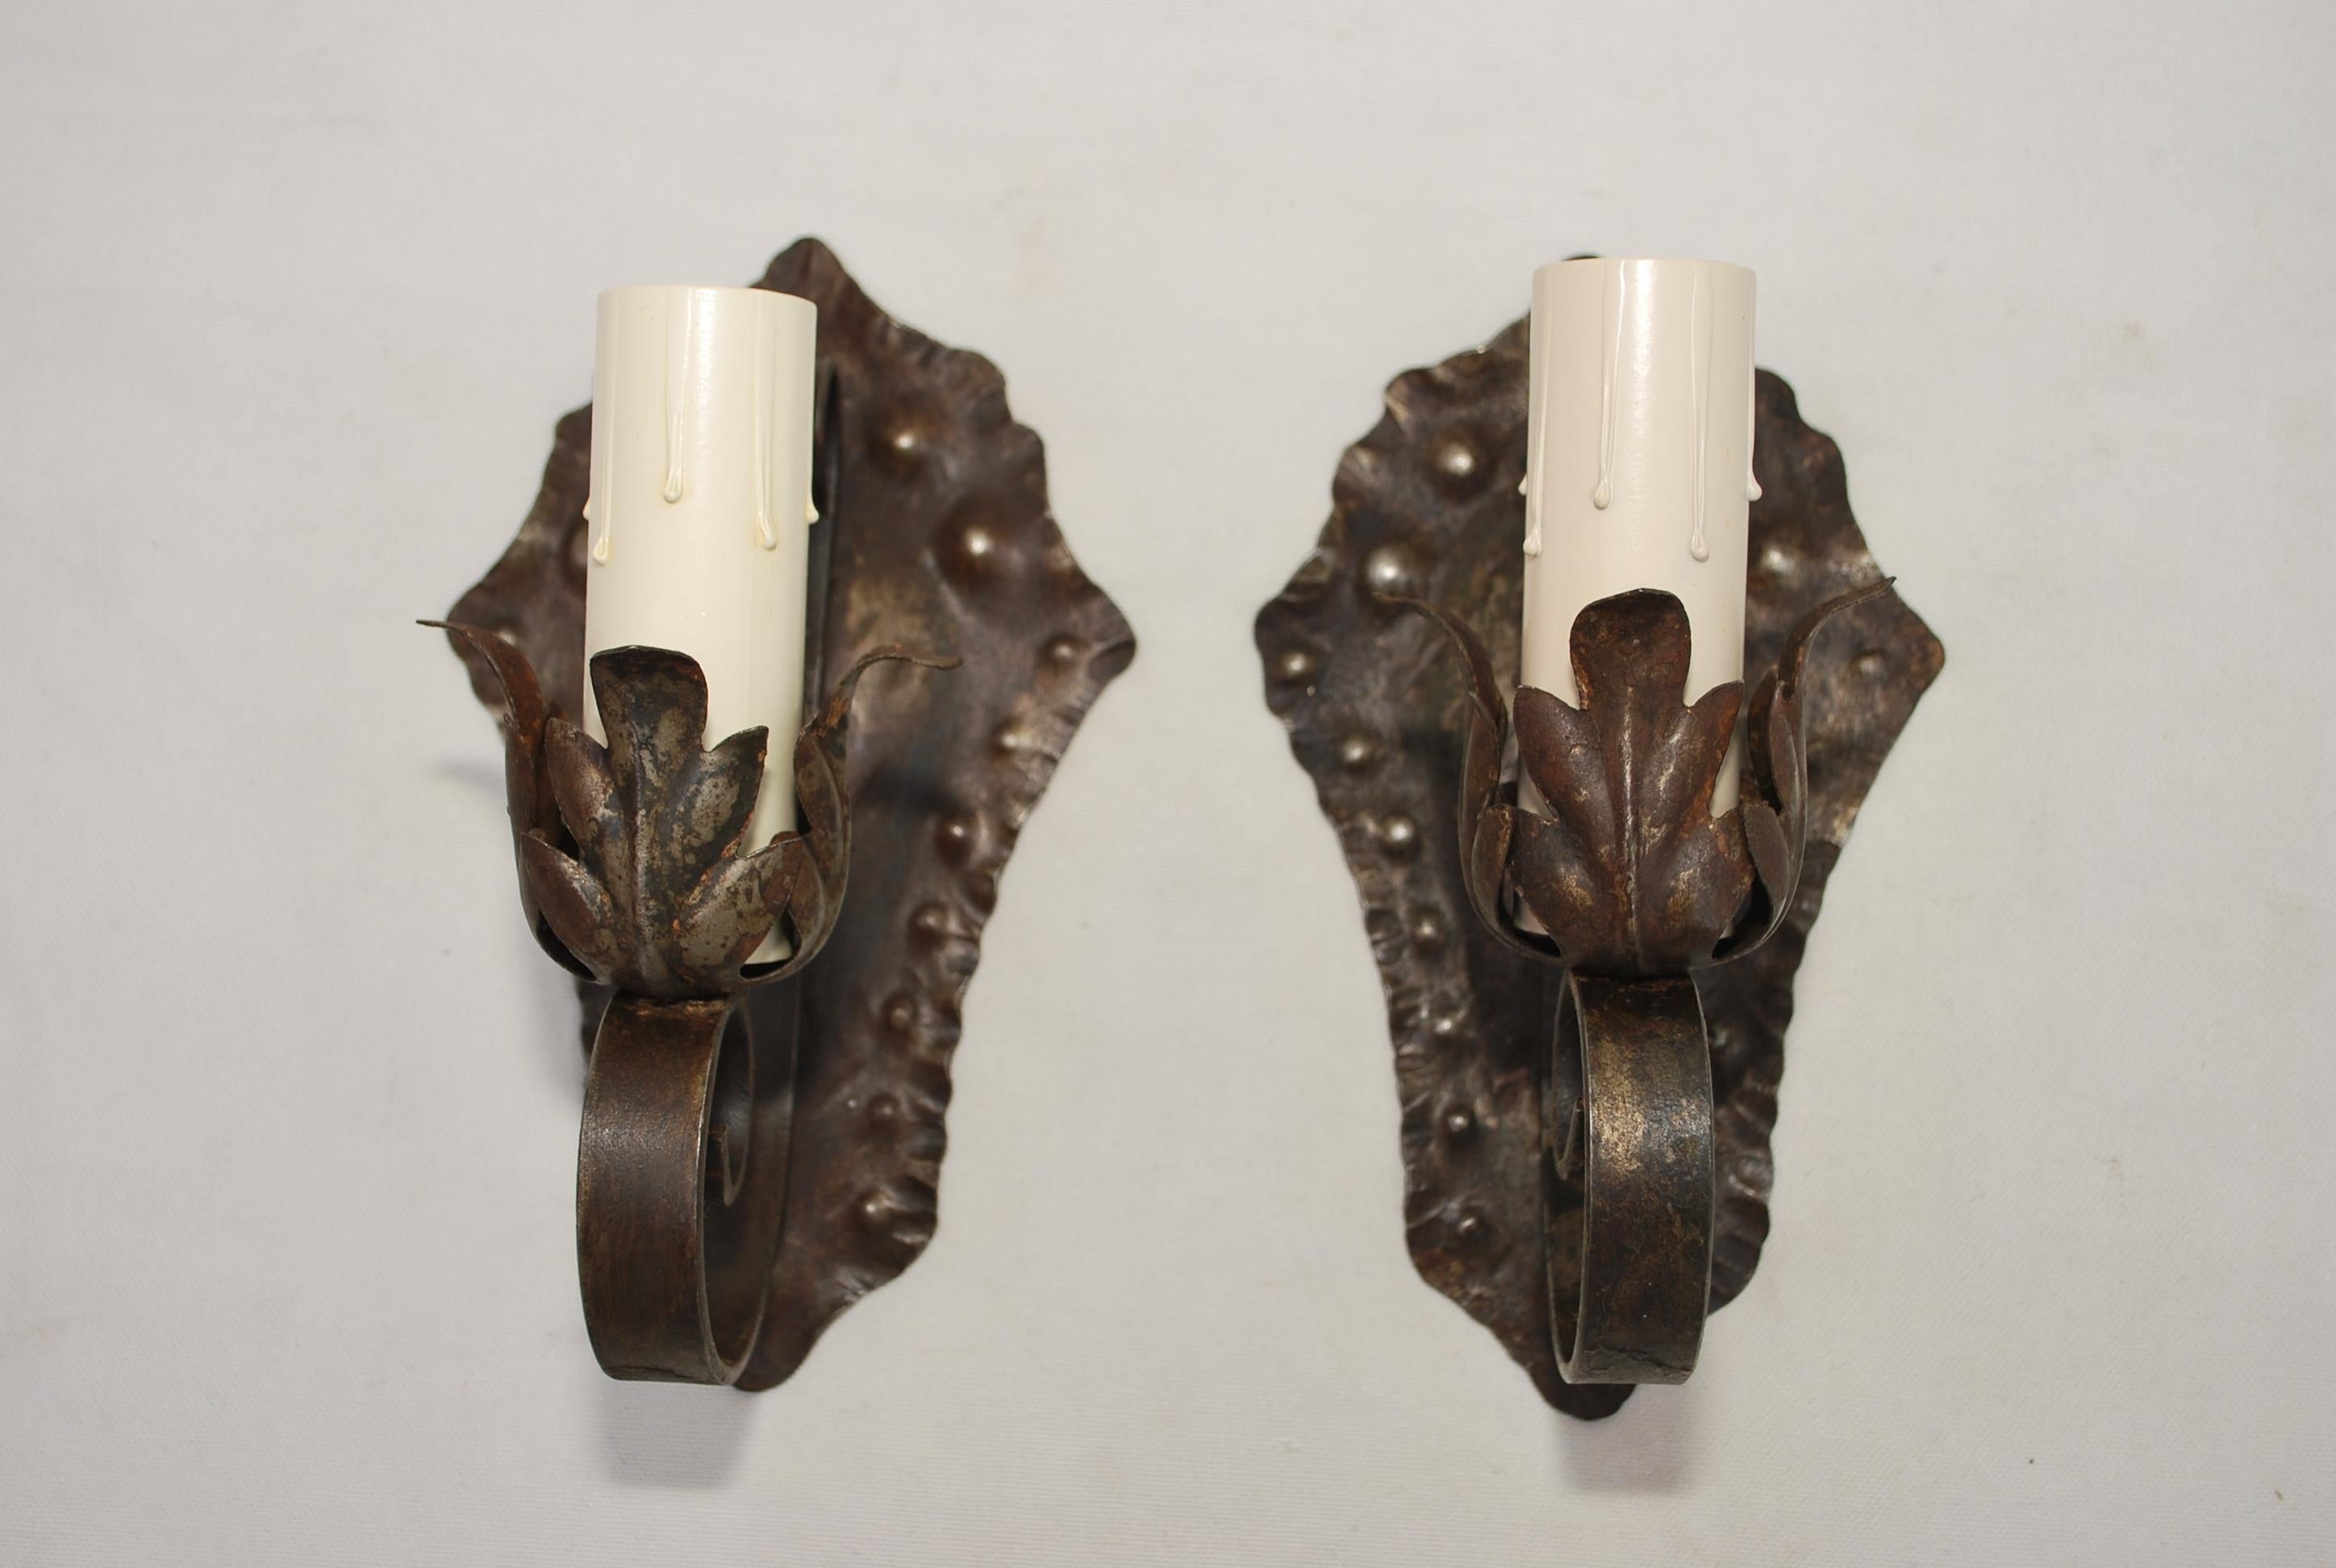 A very nice and rustic 1920's wrought iron sconces